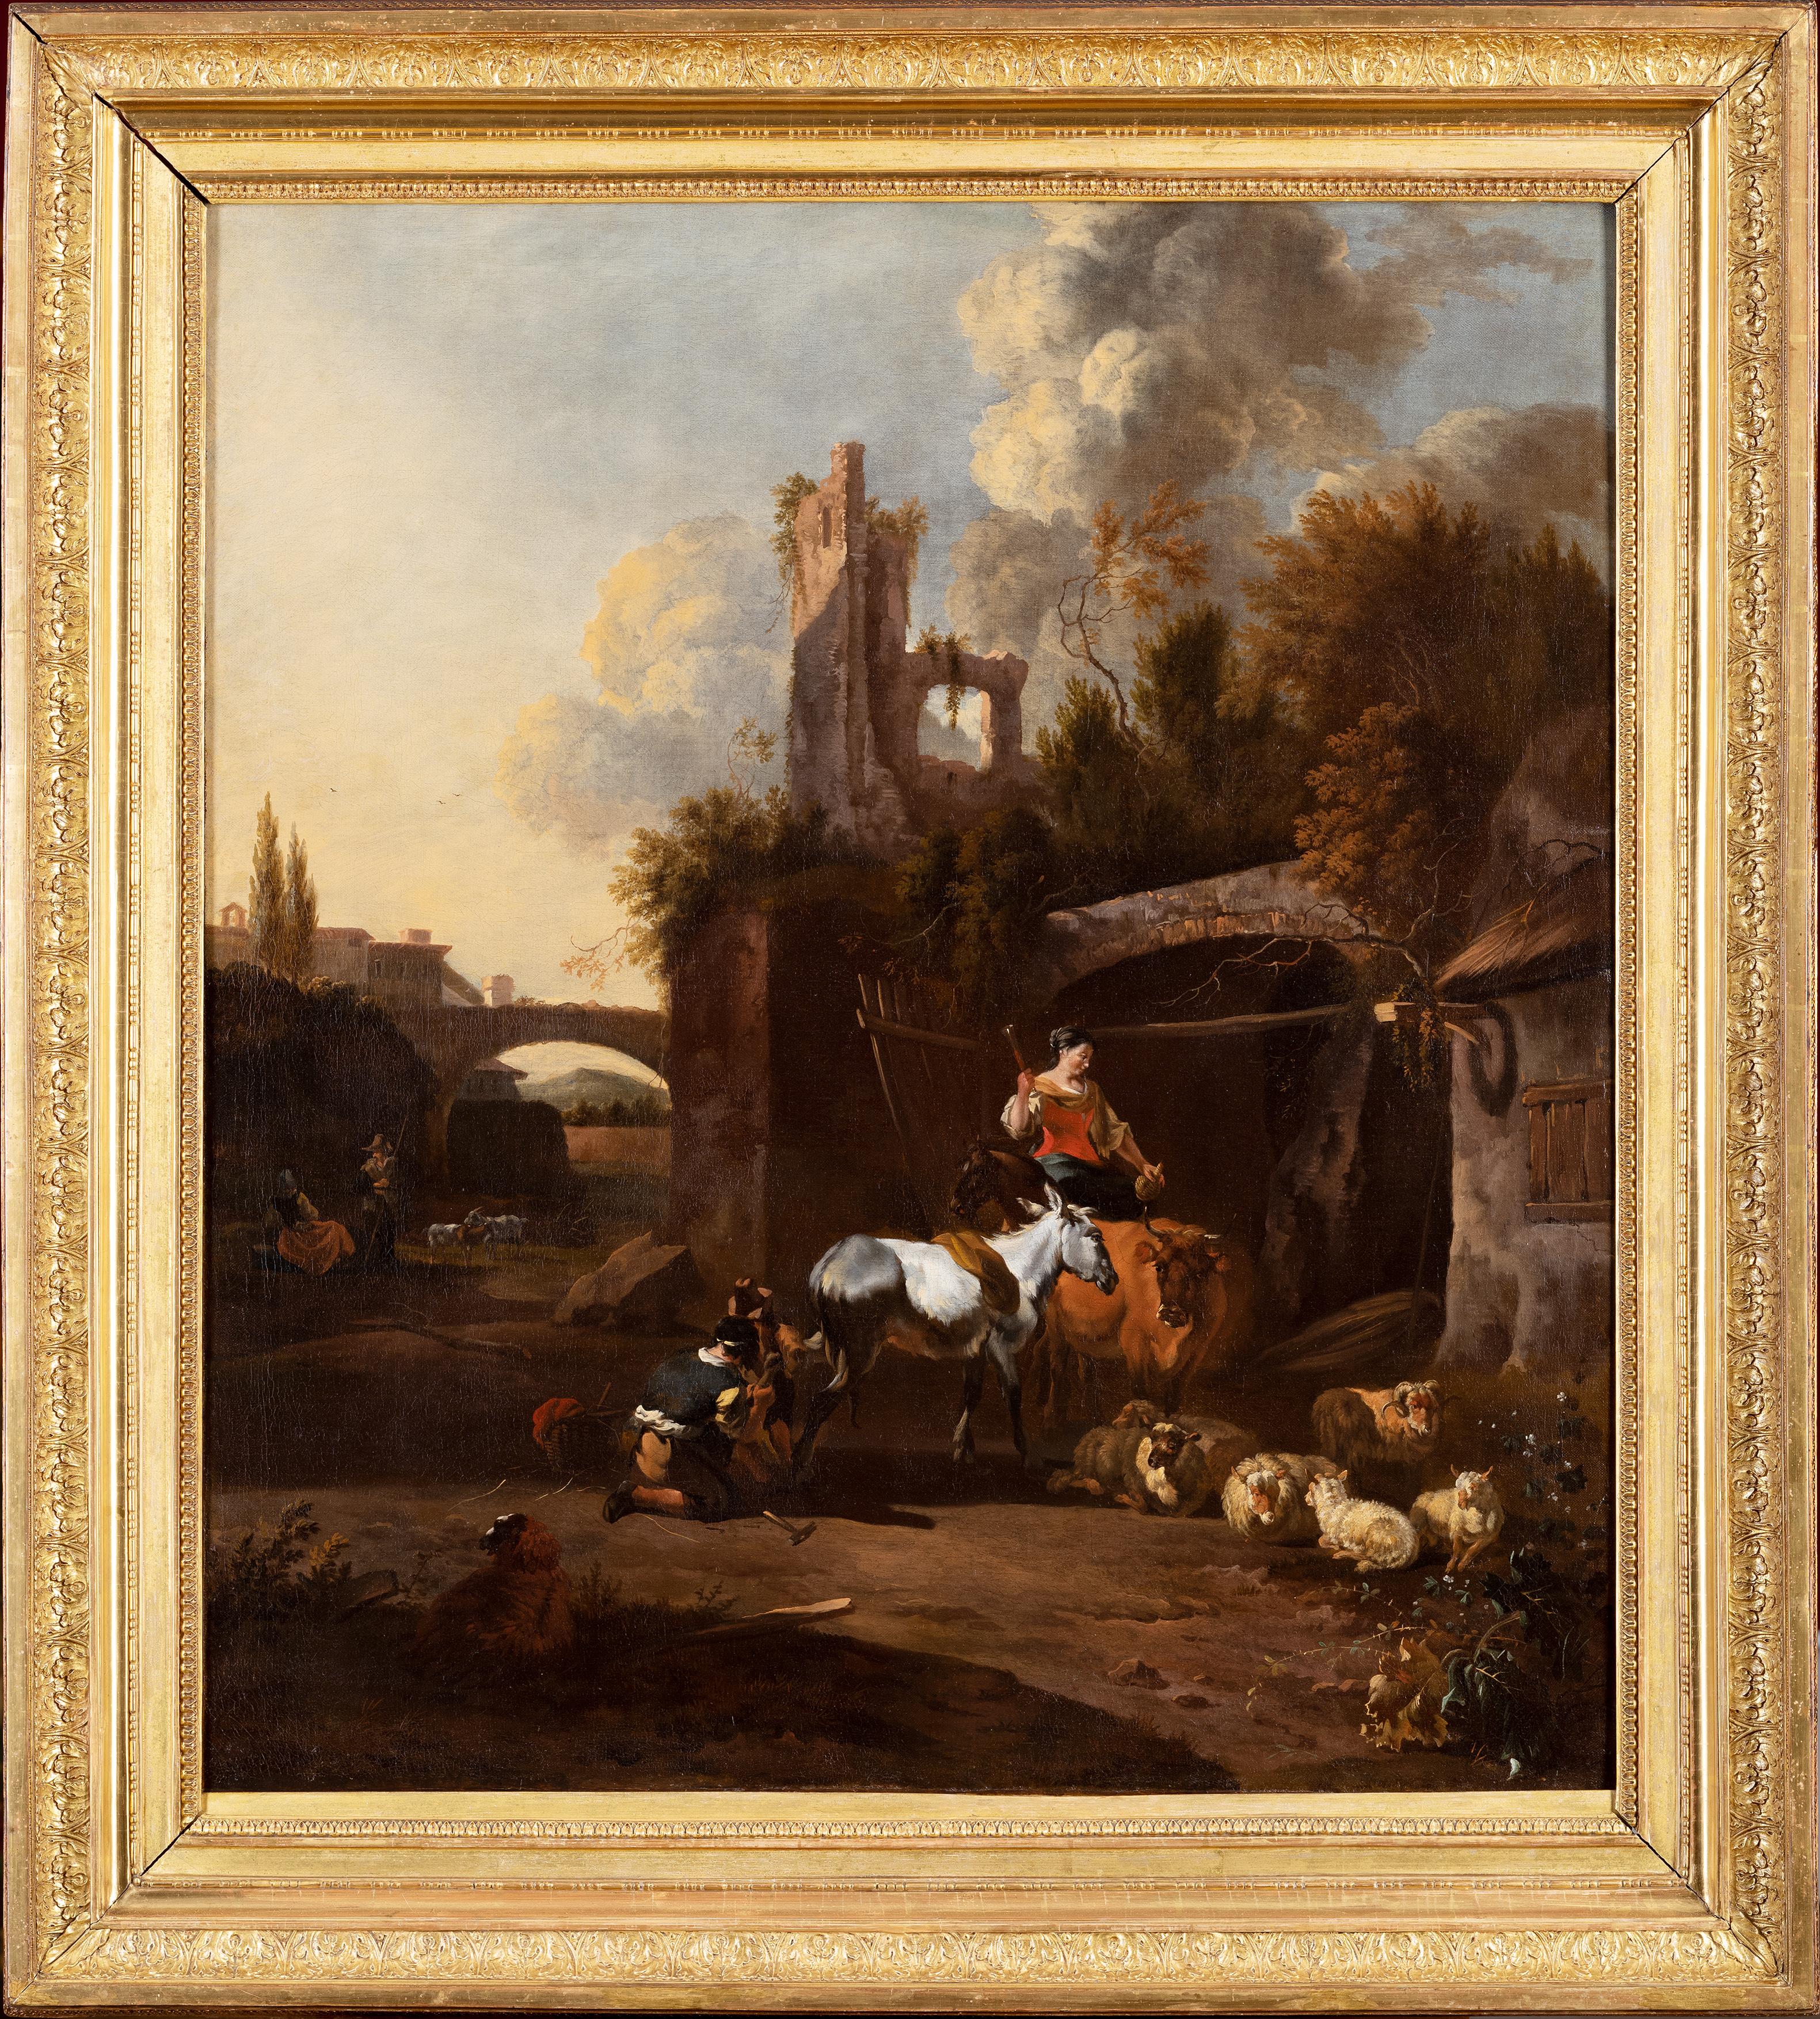 Van der Bent, Southern Landscape with woman and animals, Dutch Old Master,  Art For Sale at 1stDibs